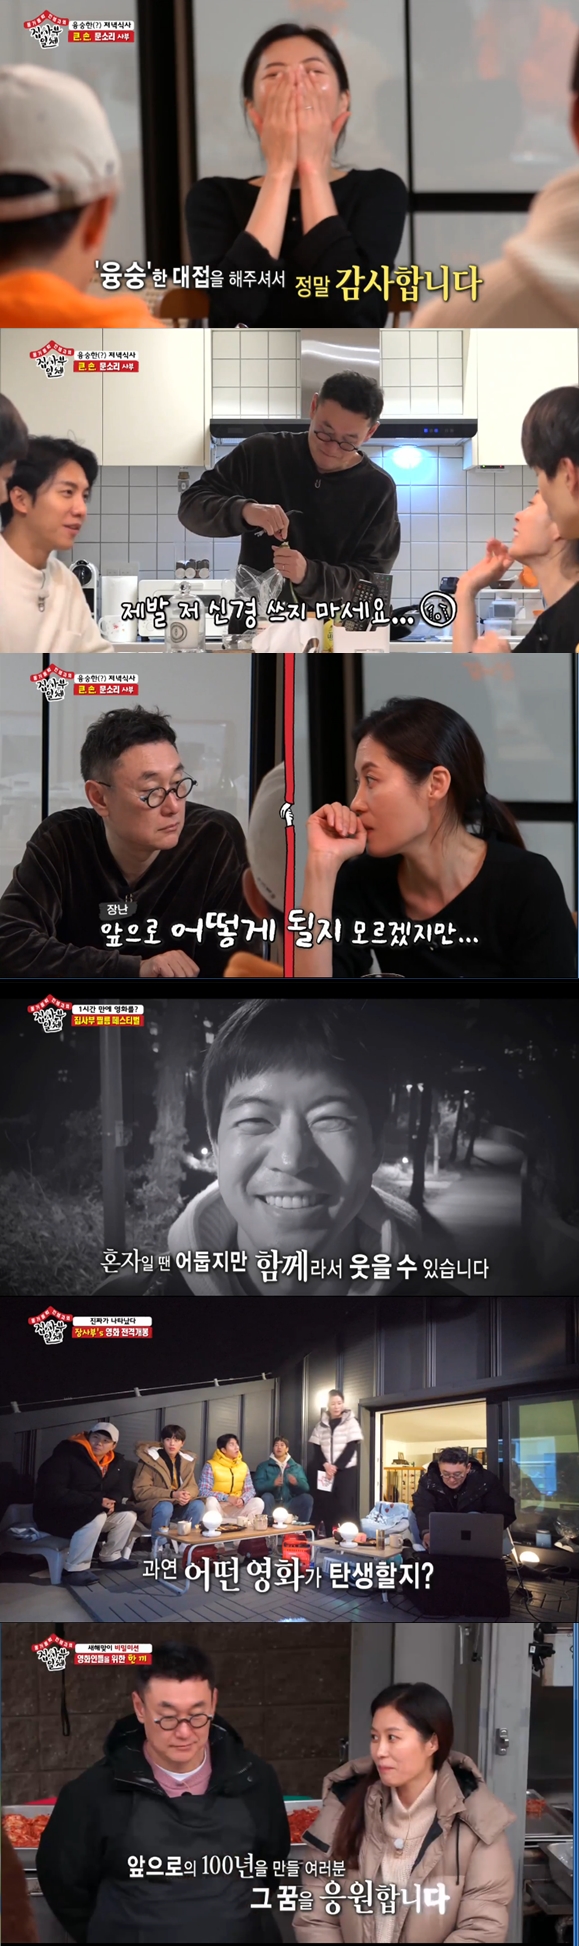 It was a couple who lived with respect to each other.In the SBS entertainment program All The Butlers broadcasted on the 5th night, the director of the film industry, Couple Jang Joon-hwan and actor Moon So-ri, came out as masters and spent a day with the members.Moon So-ri, famous for her big hands in Dongtan, made the members feel good about chopping and chicken ribs; six people eat, but she cooked for nearly 20 servings.Husband Jang Joon-hwan showed fantastic couple breathing, with Moon So-ri bringing a kitchen towel without speaking.After cooking, Couple called the members, and director Jang Joon-hwan said, There is nothing to set up, but eat a lot.Yang Se-hyeong was satisfied with eating oysters sprinkled with hot sauce and saying, It is like eating a plant now.Yook Sungjae, who tasted chicken ribs, inhaled food without breathing, saying, If you are near the house, you will always eat it.Lee Seung-gi said, I have never said this since the army, he said. Thank you for your gentle treatment.When the members ate food without saying anything, director Jang Joon-hwan said, Our wife is really good at noticing.Yang Se-hyeong acknowledged Moon So-ris cooking skills, saying, It is originally said that good food is when you can make food with only the ingredients you have.Director Jang Joon-hwan prepared wine for the members who enjoyed the food made by his wife Moon So-ri.He struggled to pick up a wine cork in the kitchen but it wasnt easy: the members who watched it said, I think youre doing a good house job.Moon So-ri praised her husband for being too homely.Since my wife is an actor, I decided to do the dishes and laundry before my marriage, Jang Joon-hwan confessed.So when I moved, I bought a dishwasher, he said, laughing.Moon So-ri said, I do not share my work computationally because I do not live short, and some days one person can do more.If you feel like you can go looking at the same place, then you can solve the rest, said Jang Joon-hwan.Moon So-ri then said, What are you saying so long? You can say youre like me.Jang Joon-hwan said, There is no other place. He made Moon So-ri heartbreak. Yang Se-hyeong said, Im Ki-eung is very good.It is the first time since Jae Seok has been in this position, Lee Seung-gi said, It is great that there is no hesitation. Moon So-ri also asked if there is a conflict between the couple, saying, If I do not have a desire to beat you now, it will take a little time, but at some point it will be tailored.Also, Moon So-ri said, So I have such a mind that I want to be recognized as a good person for that person.So I try to live with my best and try to live with it. He said, I do not know what will happen in the future, but my husband still has a respectable side. After dinner, the members released their respective films on the subject of beauty: Lee Sang-yoon filmed Moon So-ri & Jang Joon-hwans companion dog barley and dharma.The leading barley waited for the slow-walking dharma, and when dharma came, he started.Lee Sang-yoon said, I heard the story of Barley and Dalma, and I wanted to include it because I thought that I thought of each other.Jang Joon-hwan said, I was more surprised and surprised because my children were my children.When Moon So-ri was impressed at the slow, Lee Seung-gi laughed, saying, Slow is a foul, I walked slow, but I can not help but be impressed.After the festival, Moon So-ri and Yang Se-hyeong prepared a snack for the back-up; Jang Joon-hwan said, I was going to report Yang Yang-yuk on TV at 1 am.But it made it really similar. Moon So-ri explained that it was made by putting other ingredients instead of materials without.The first thing that finished the dish in 15 minutes was Yang Se-hyeong.After the cooking was completed, Jang Joon-hwans opening remarks lengthened, and Moon So-ri laughed, saying, It was not the executive chairman who was so long.The next day Moon So-ri and Jang Joon-hwan led their students to the independent film shooting scene of the students of the Korea National University of Arts.I want to express my support in commemoration of the 100th anniversary of the Korean film. Finally, Jang Joon-hwans Into Memory was released.Lee Seung-gi, Yang Se-hyeong, Yook Sungjae, Lee Sang-yoons awkward first meeting was gradually becoming one.